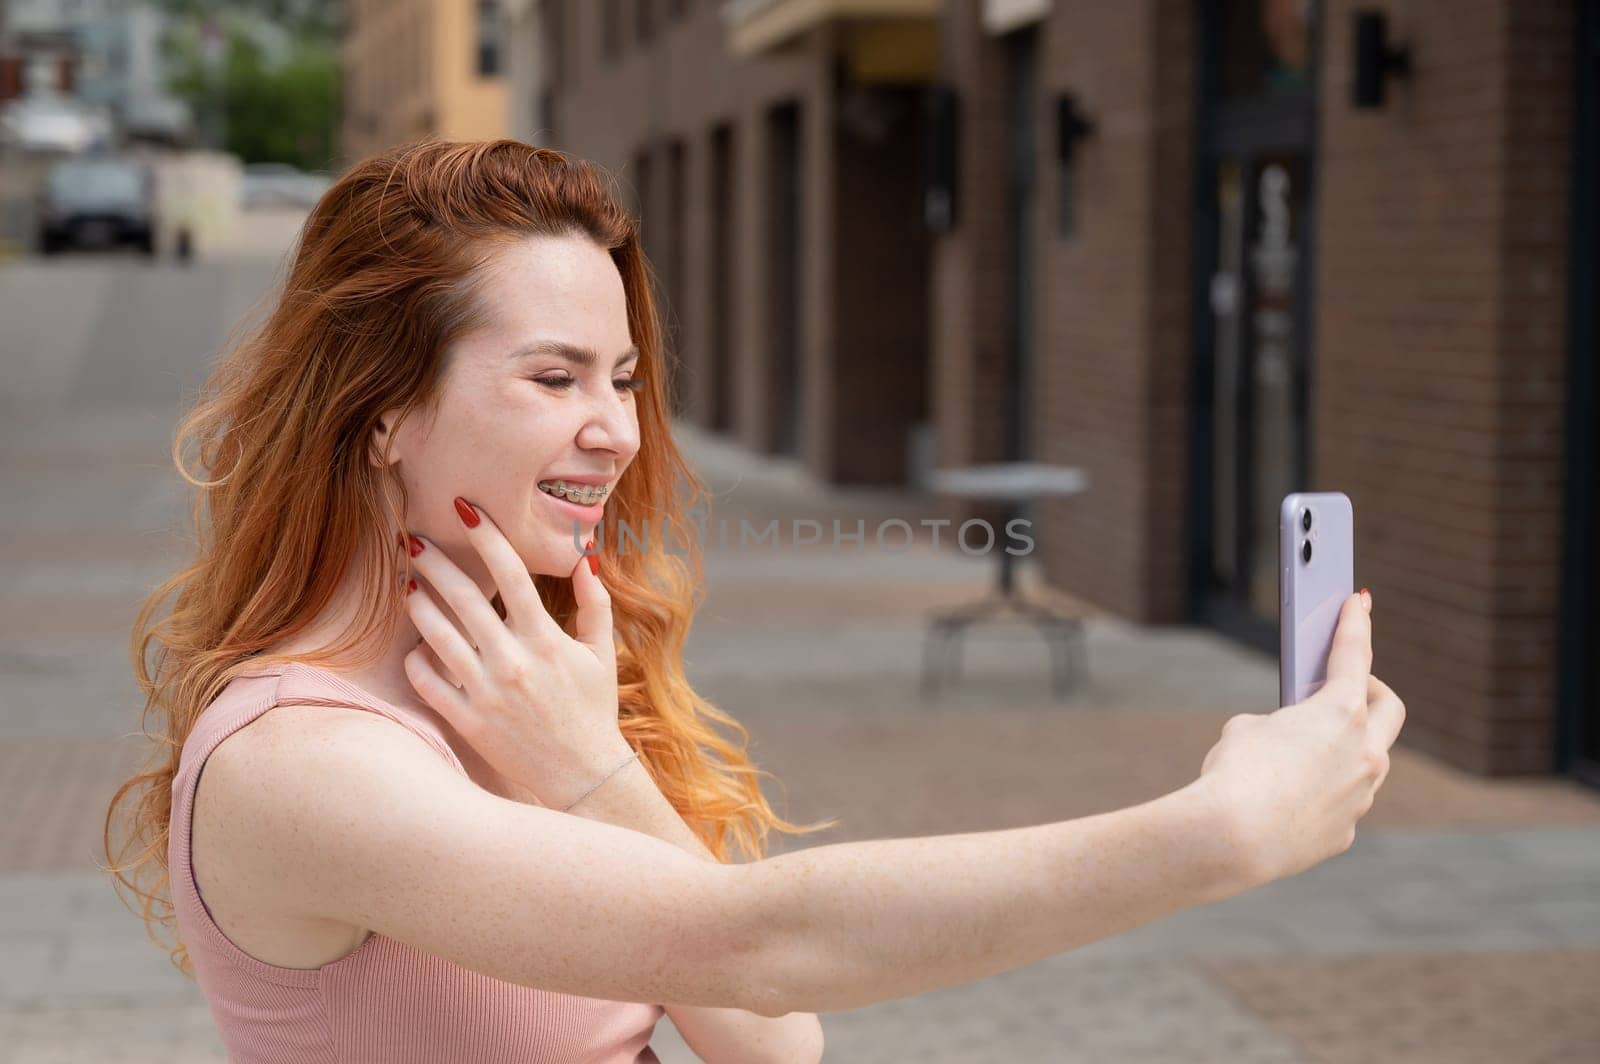 Young woman with braces on her teeth smiles and takes a selfie on a smartphone outdoors